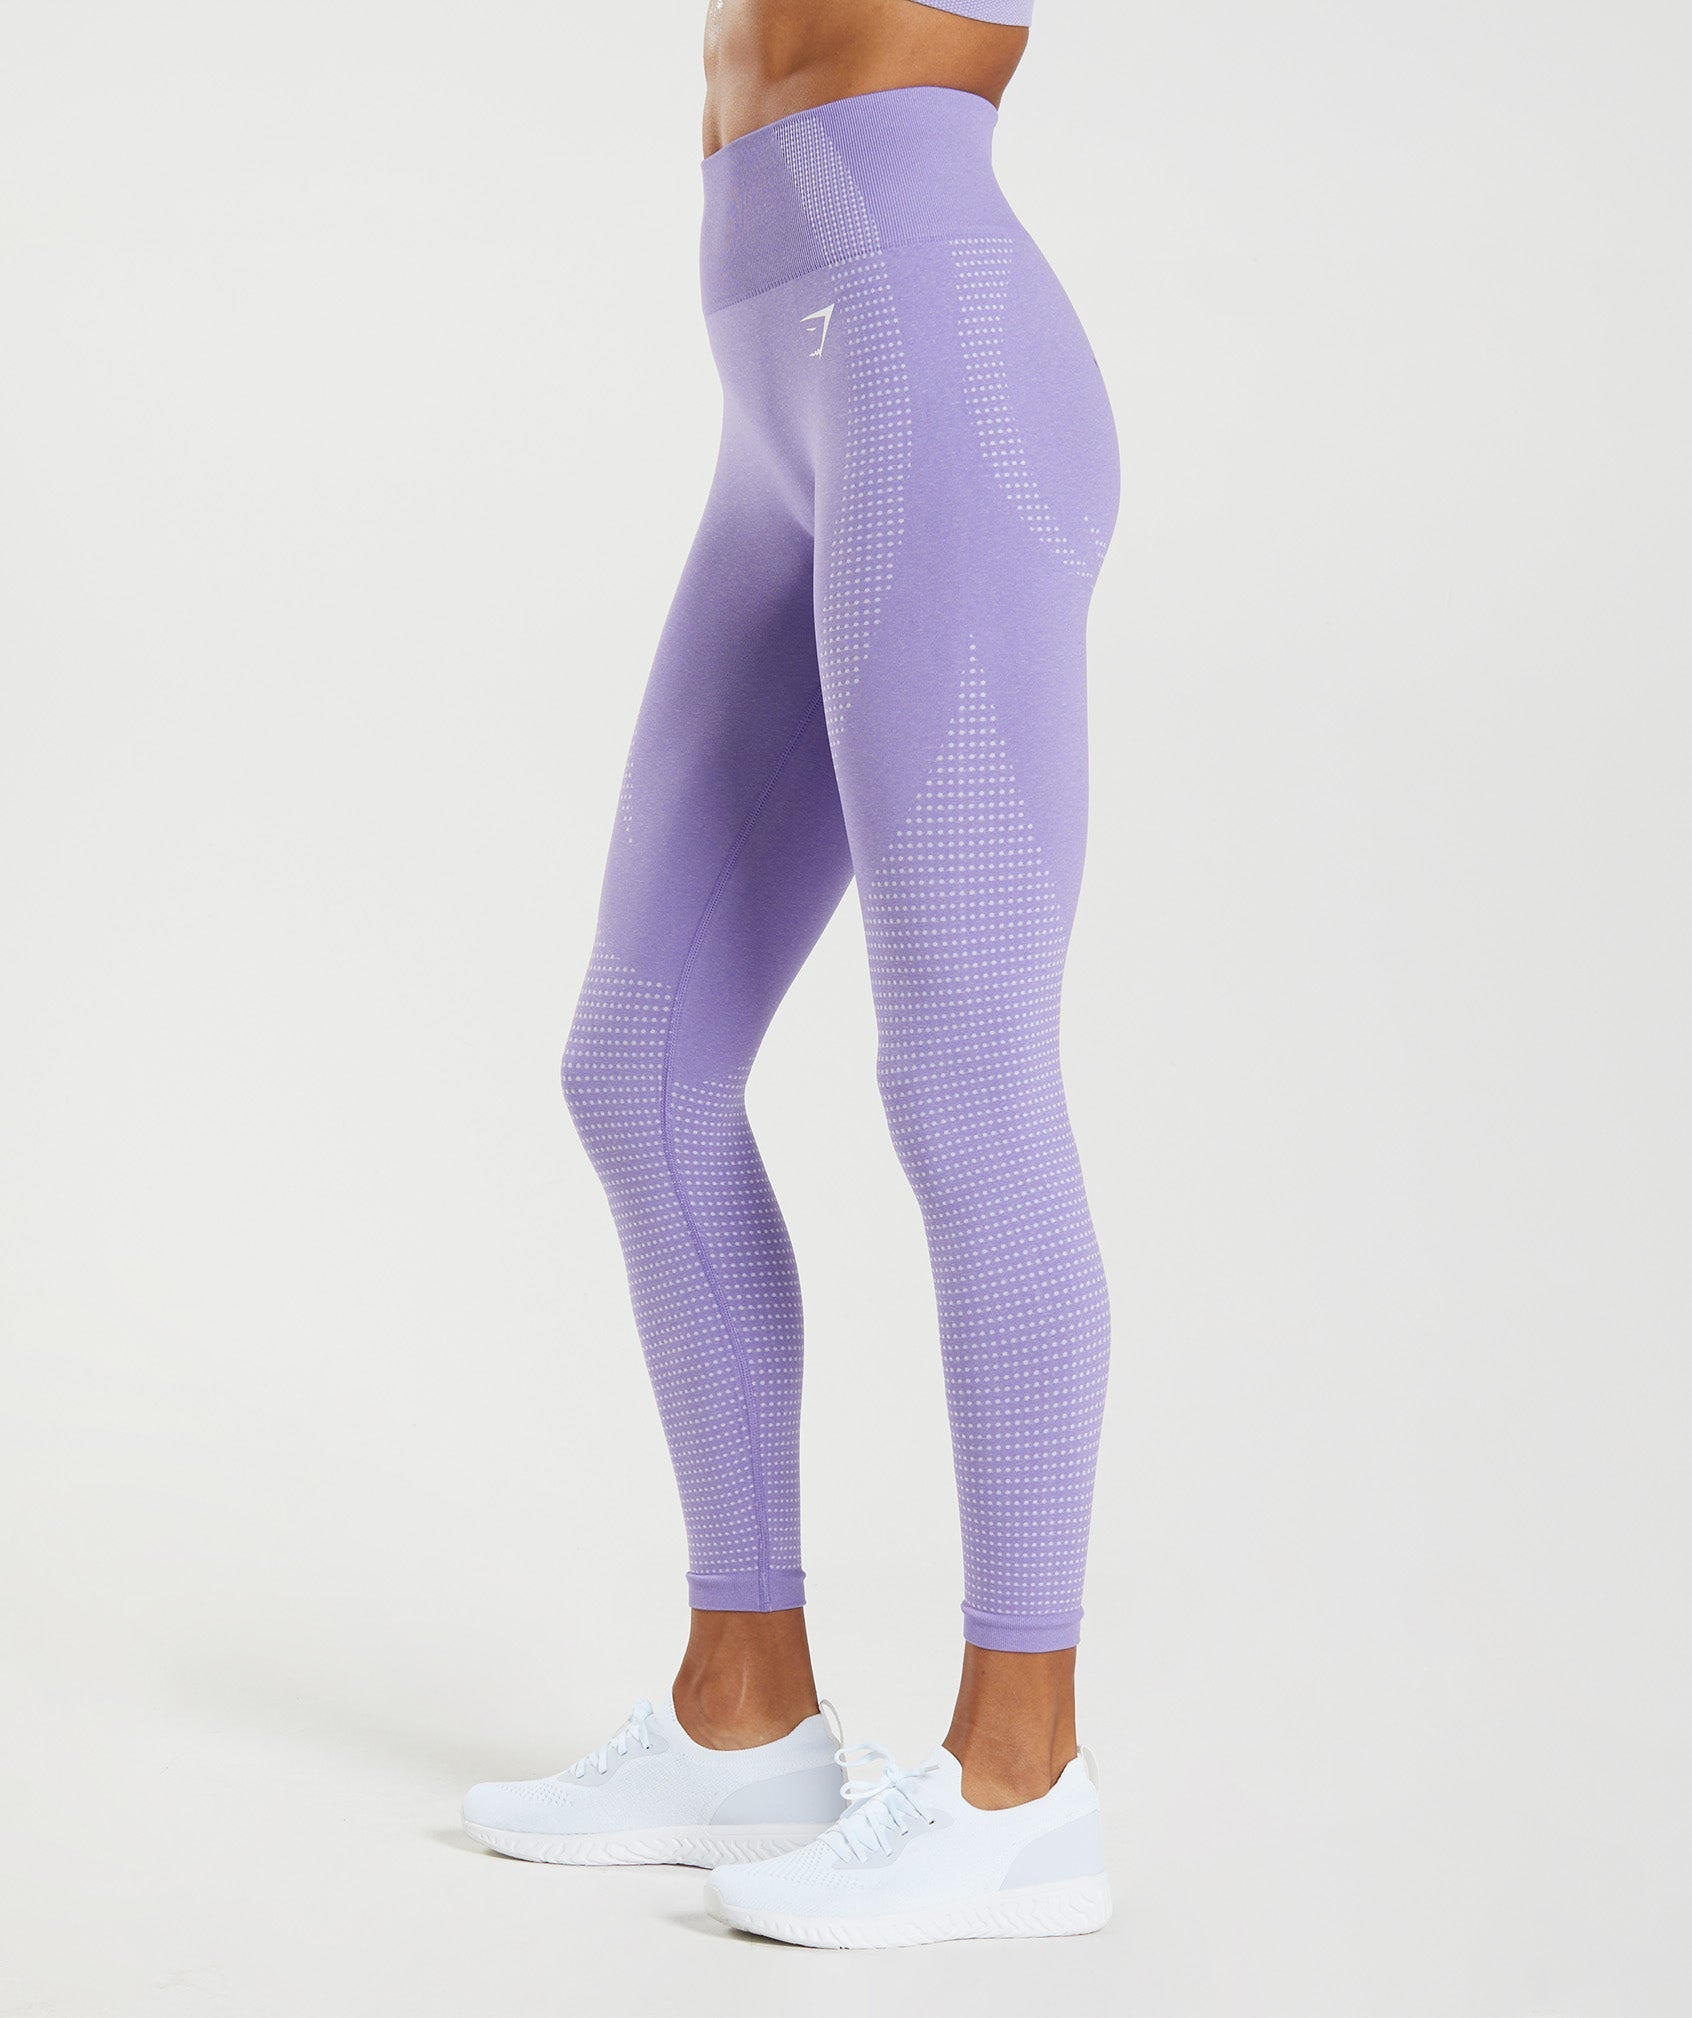 Gymshark ADAPT MARL SEAMLESS LEGGINGS Purple Size XS - $43 New With Tags -  From Sun